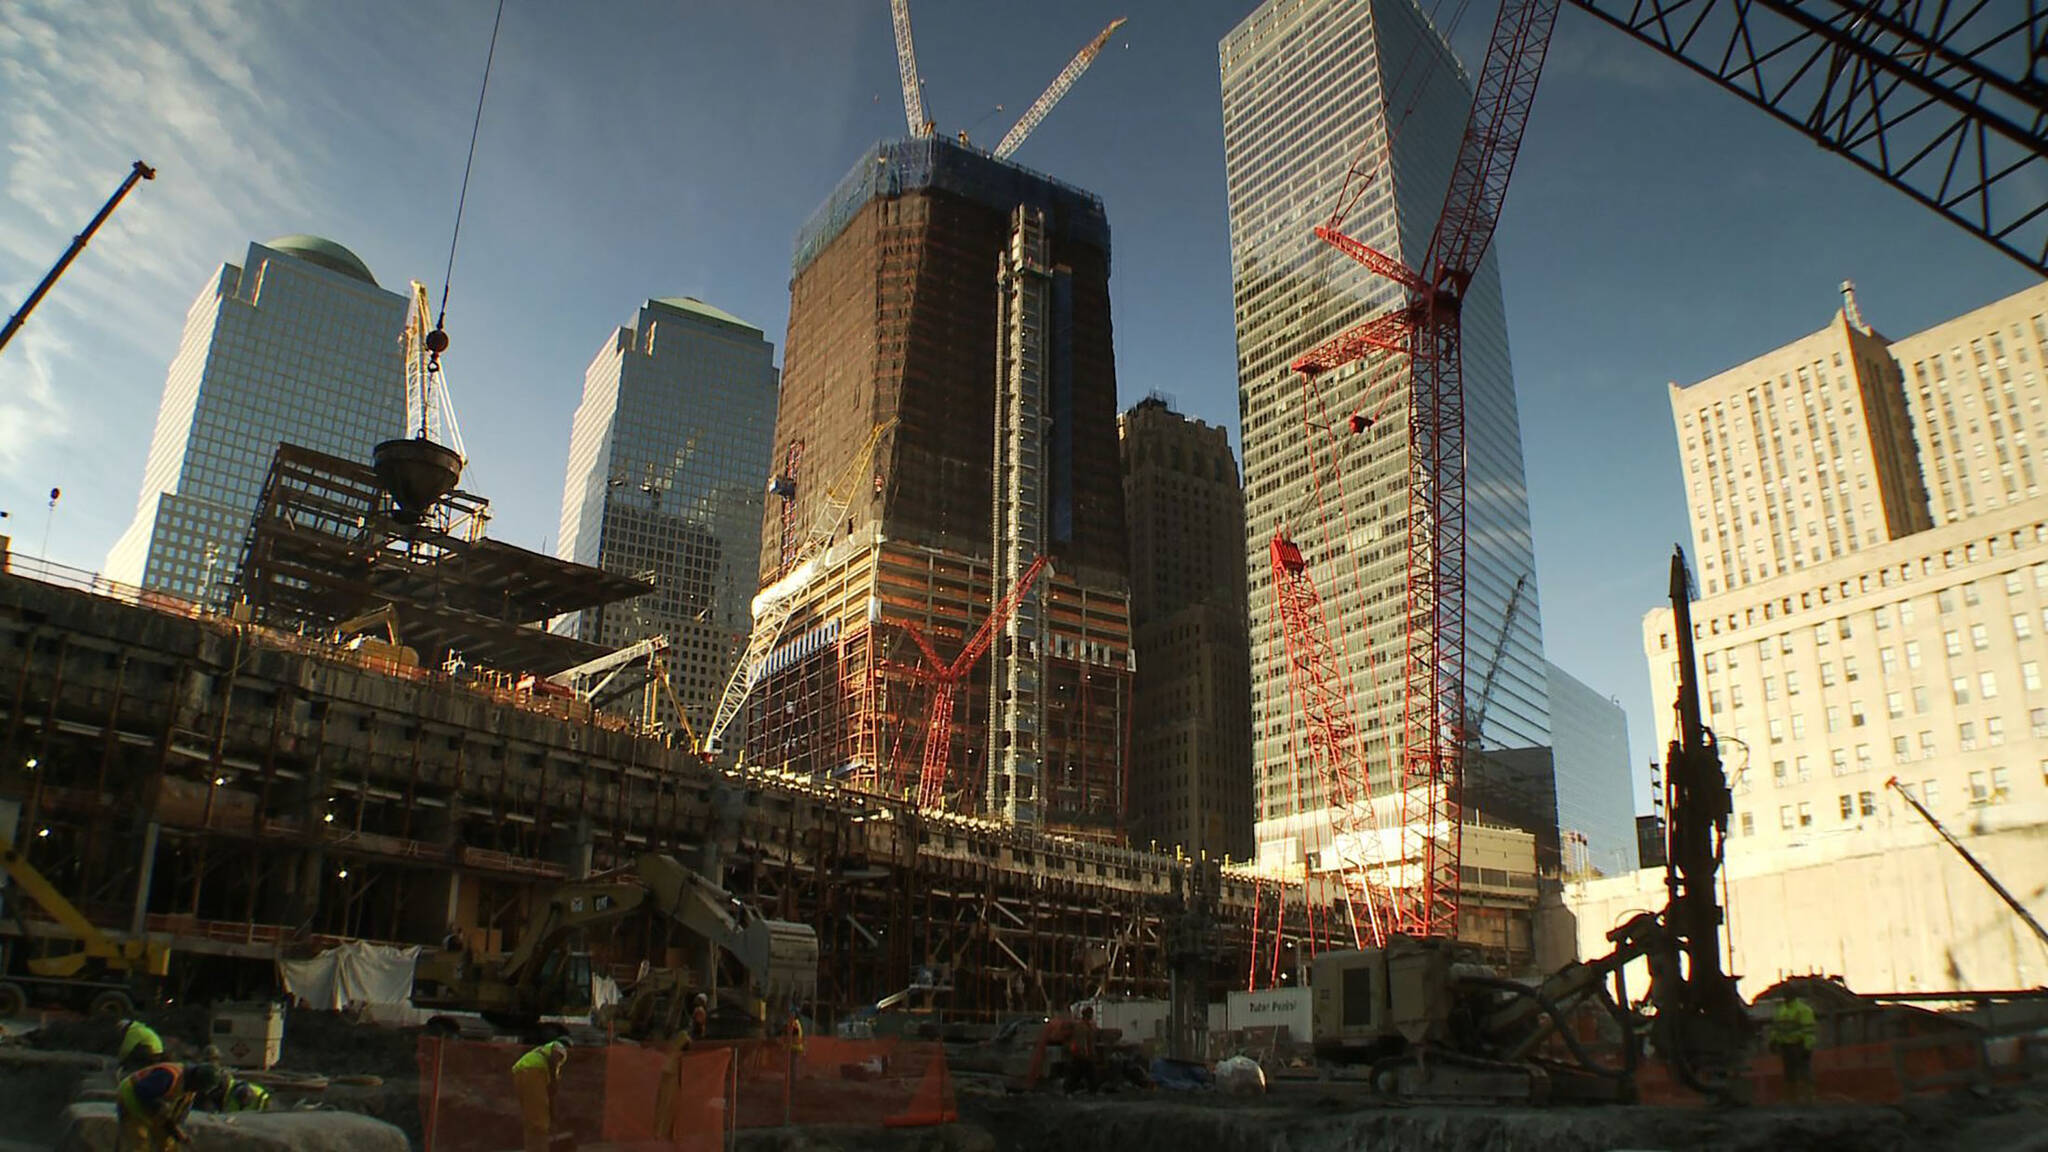 View of the foundations of the Ground Zero area rebuilding project for the Rising: Rebuilding Ground Zero documentary Co-produced by Danny Forster and Steven Spielberg about the rebuilding of the World Trade Center site in the wake of 9/11.